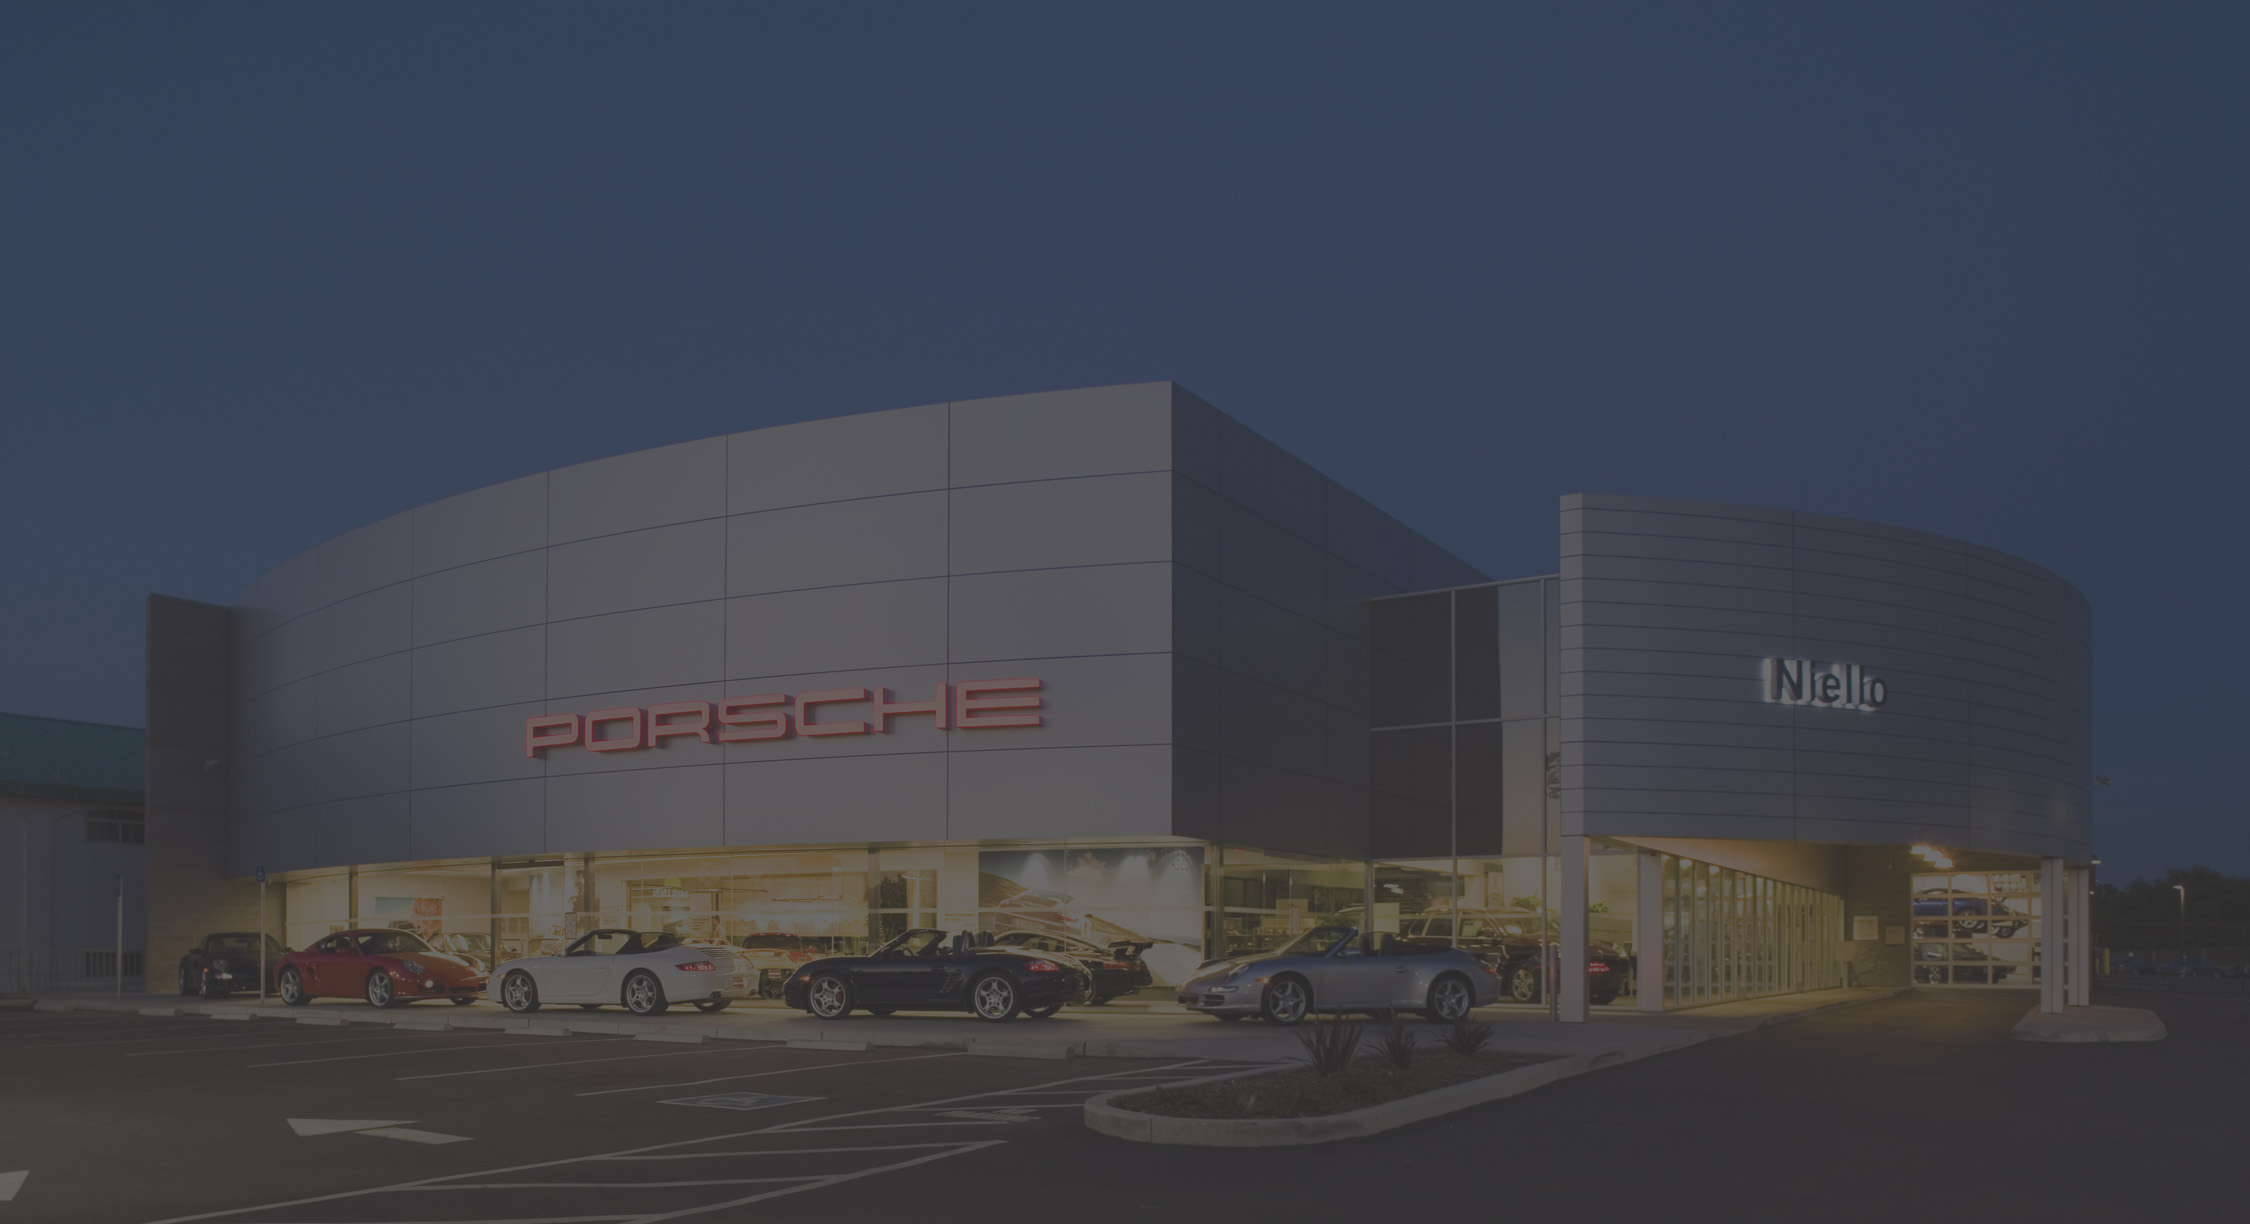  For a new Porsche dealership in Rocklin, California, murakami/Nelson was tasked with creating a building that reflected the brand values of Porsche – high performance and design superiority. The 26,700 s.f. facility uses clean lines and modern mater